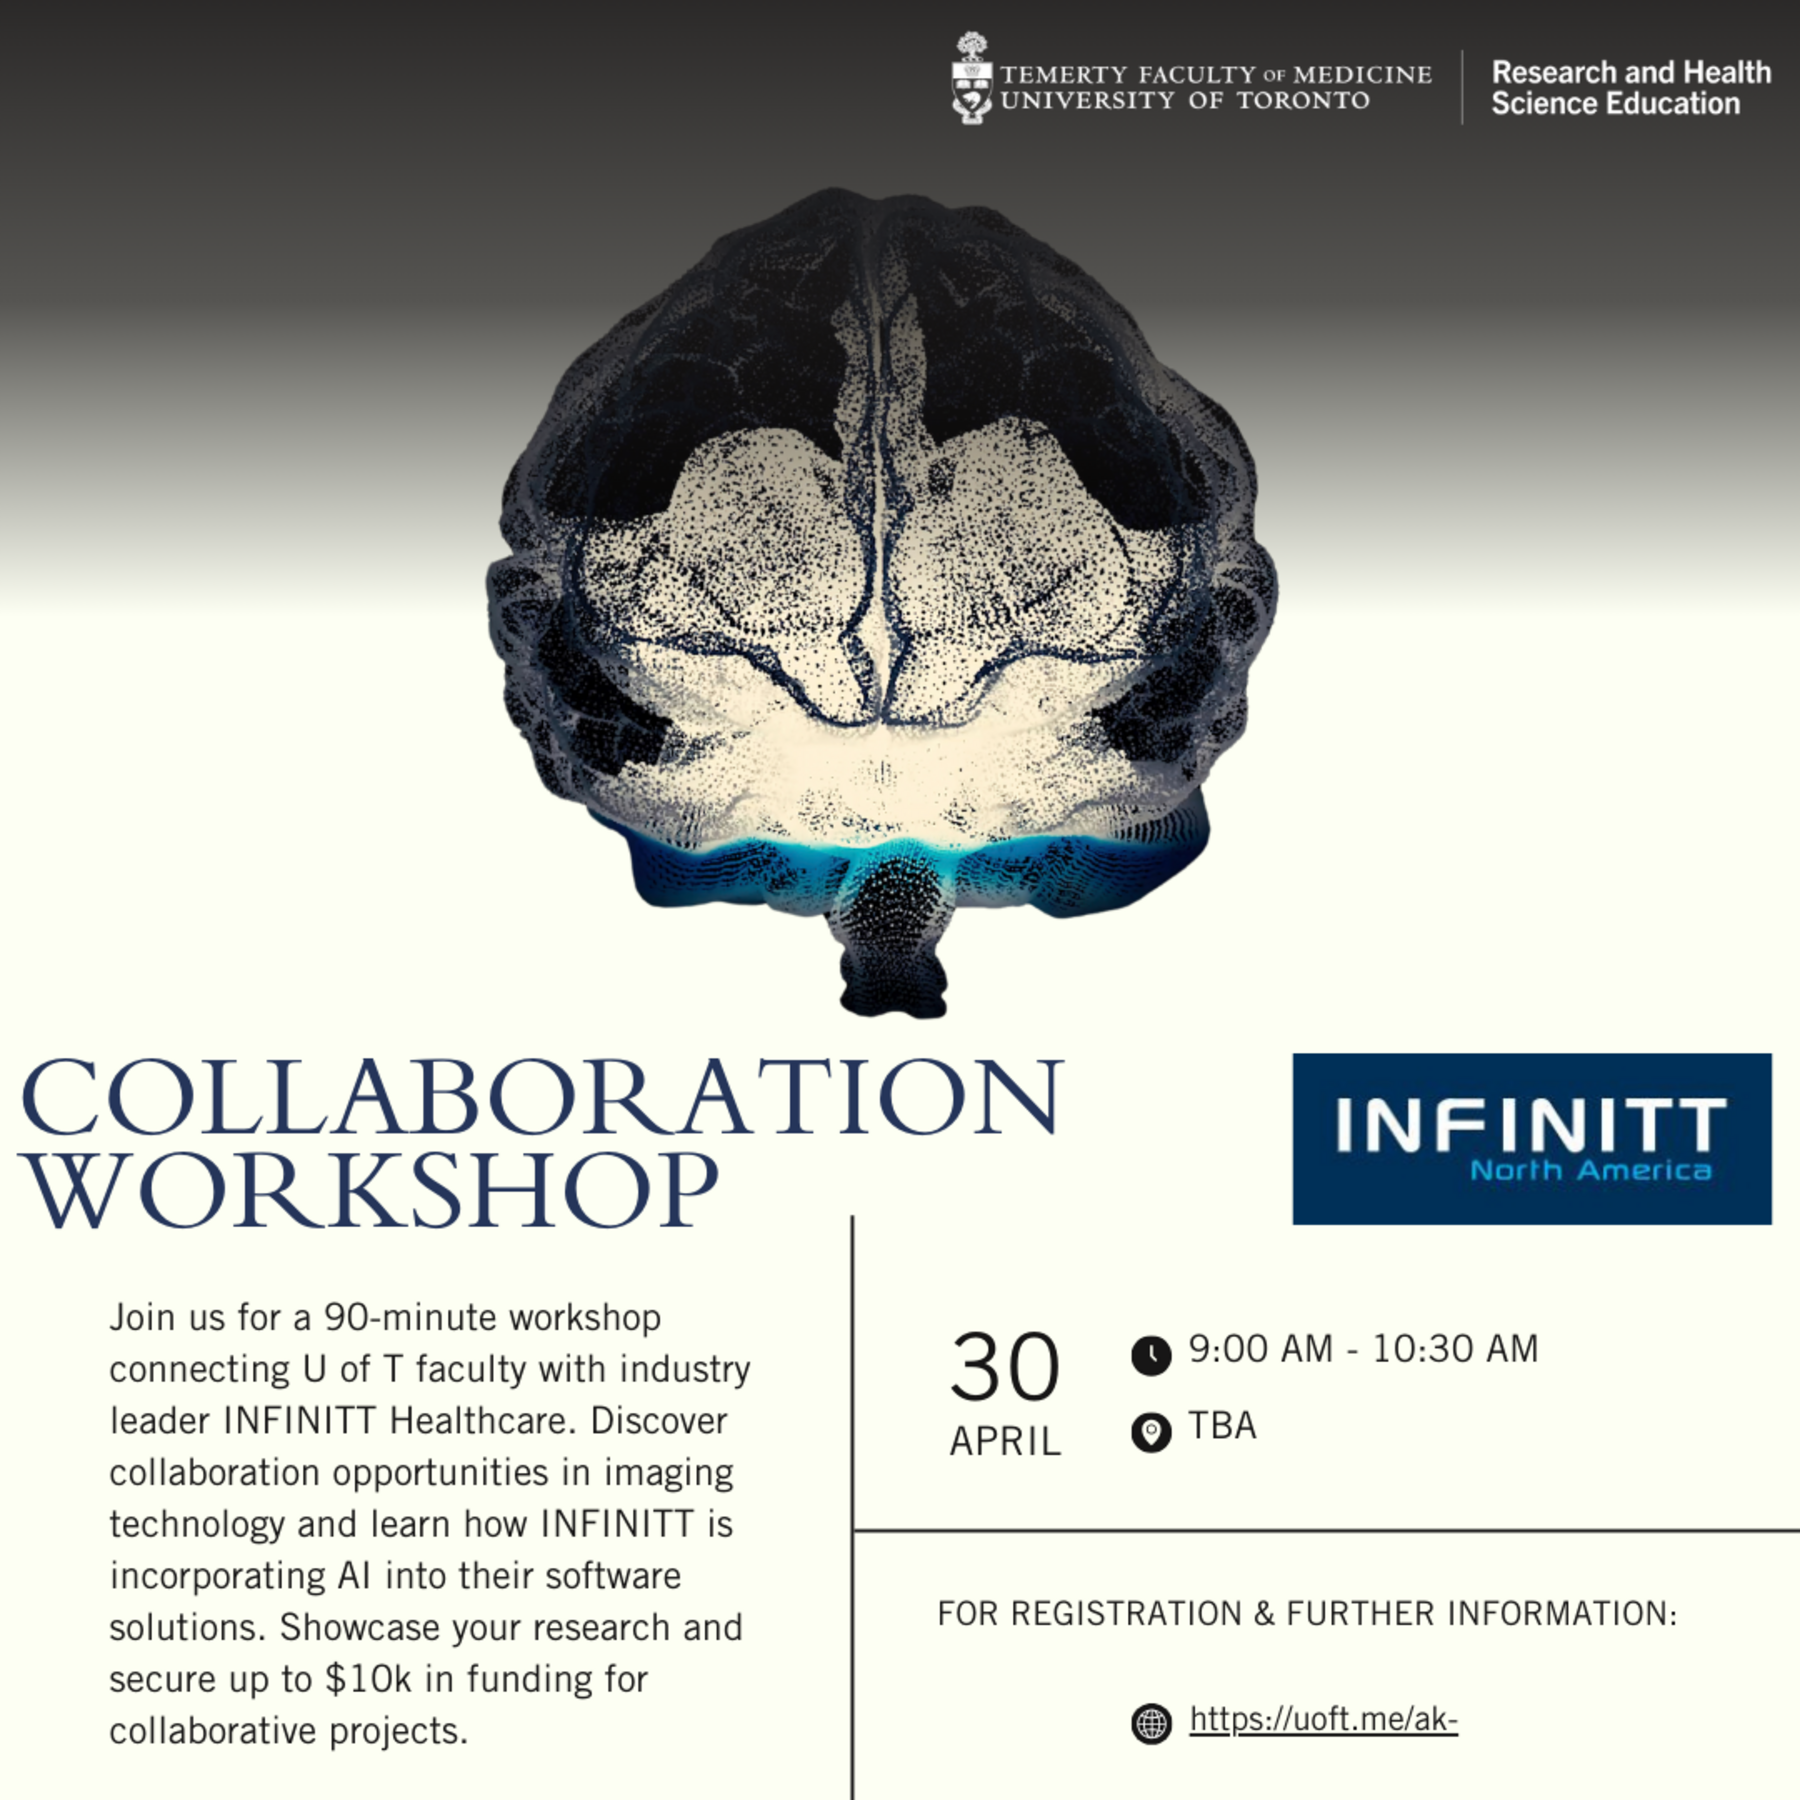 Join us for a 90-minute workshop connecting U of T faculty with industry leader INFINITT Healthcare. Discover collaboration opportunities in imaging technology and learn how INFINITT is incorporating AI into their software solutions. Showcase your research and secure up to $10k in funding for collaborative projects. 